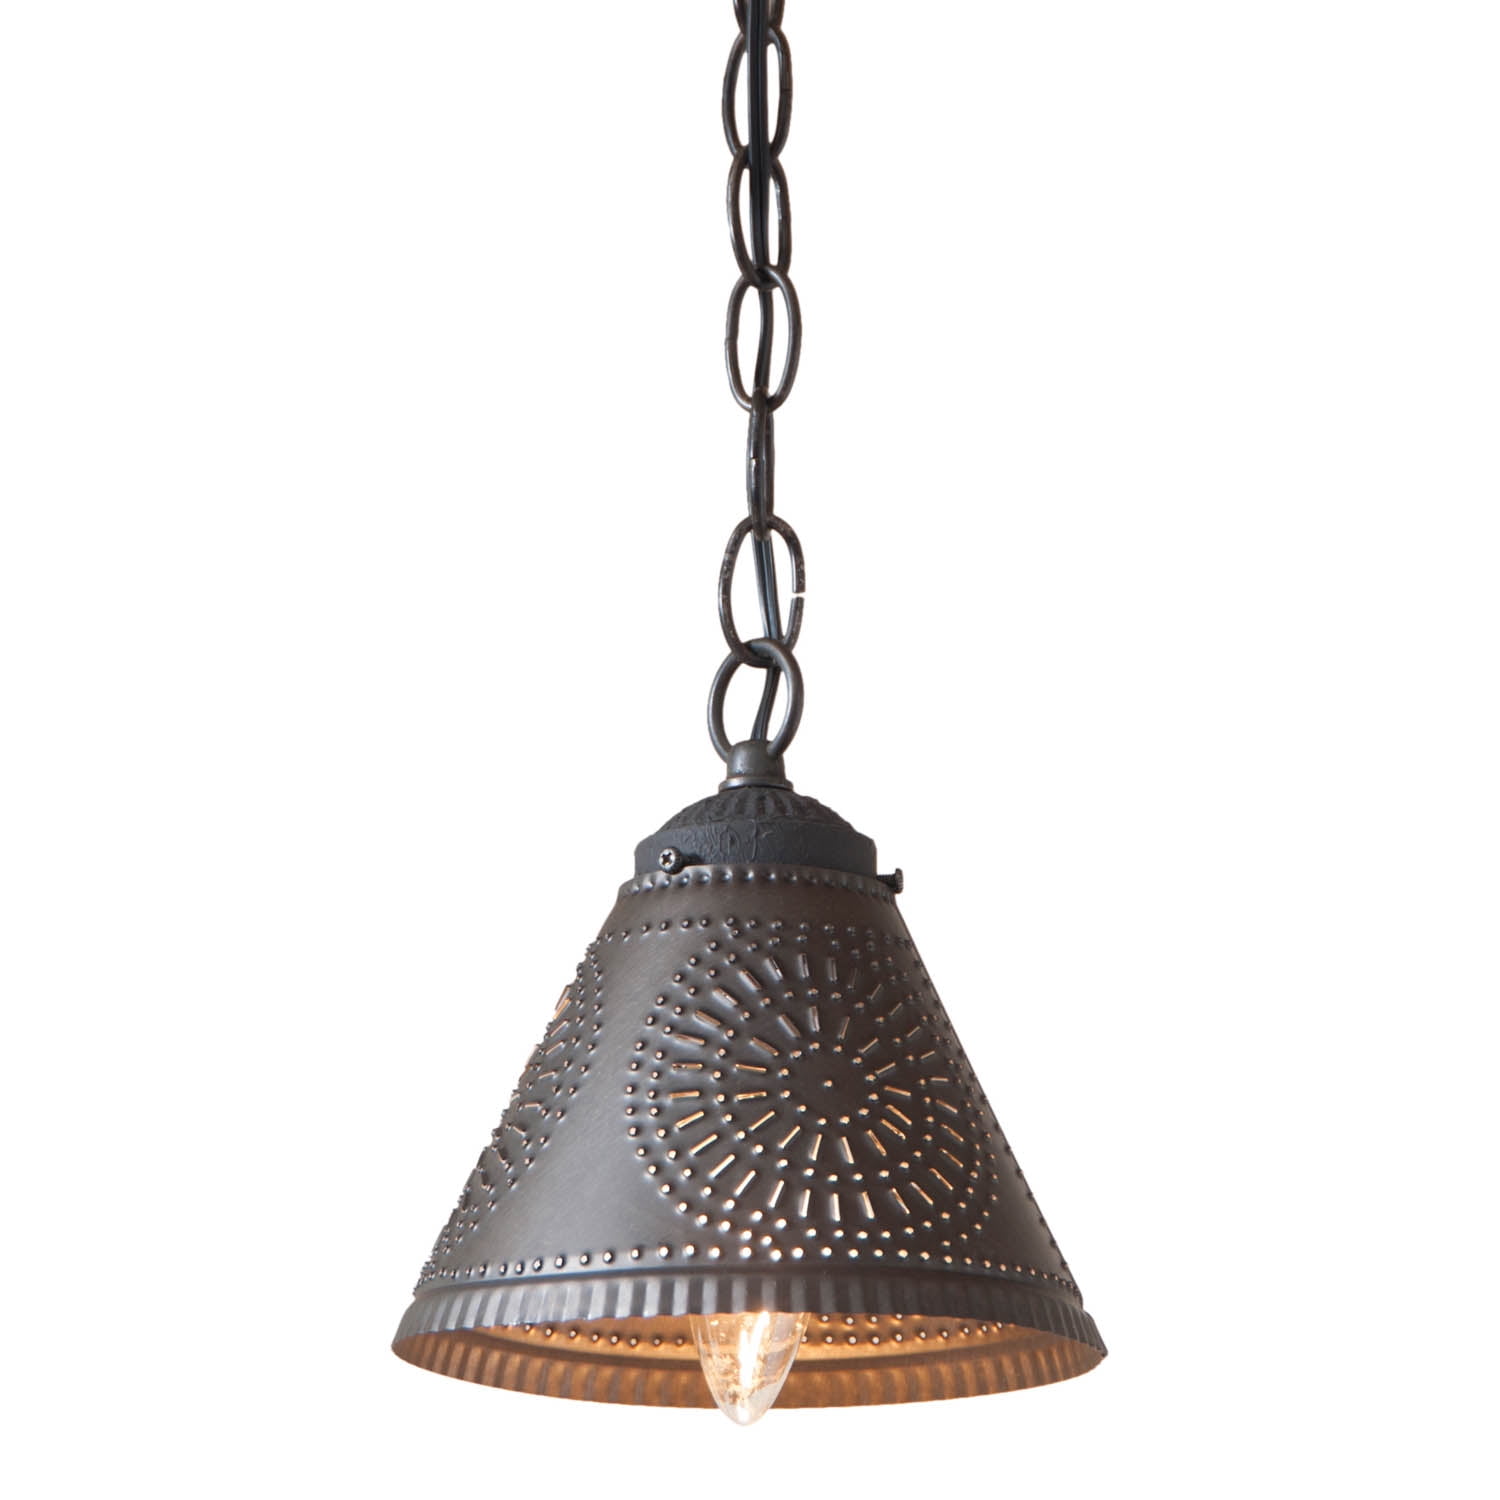 Country new HOMESPUN red hanging wood ceiling light w/ black punched tin shade 